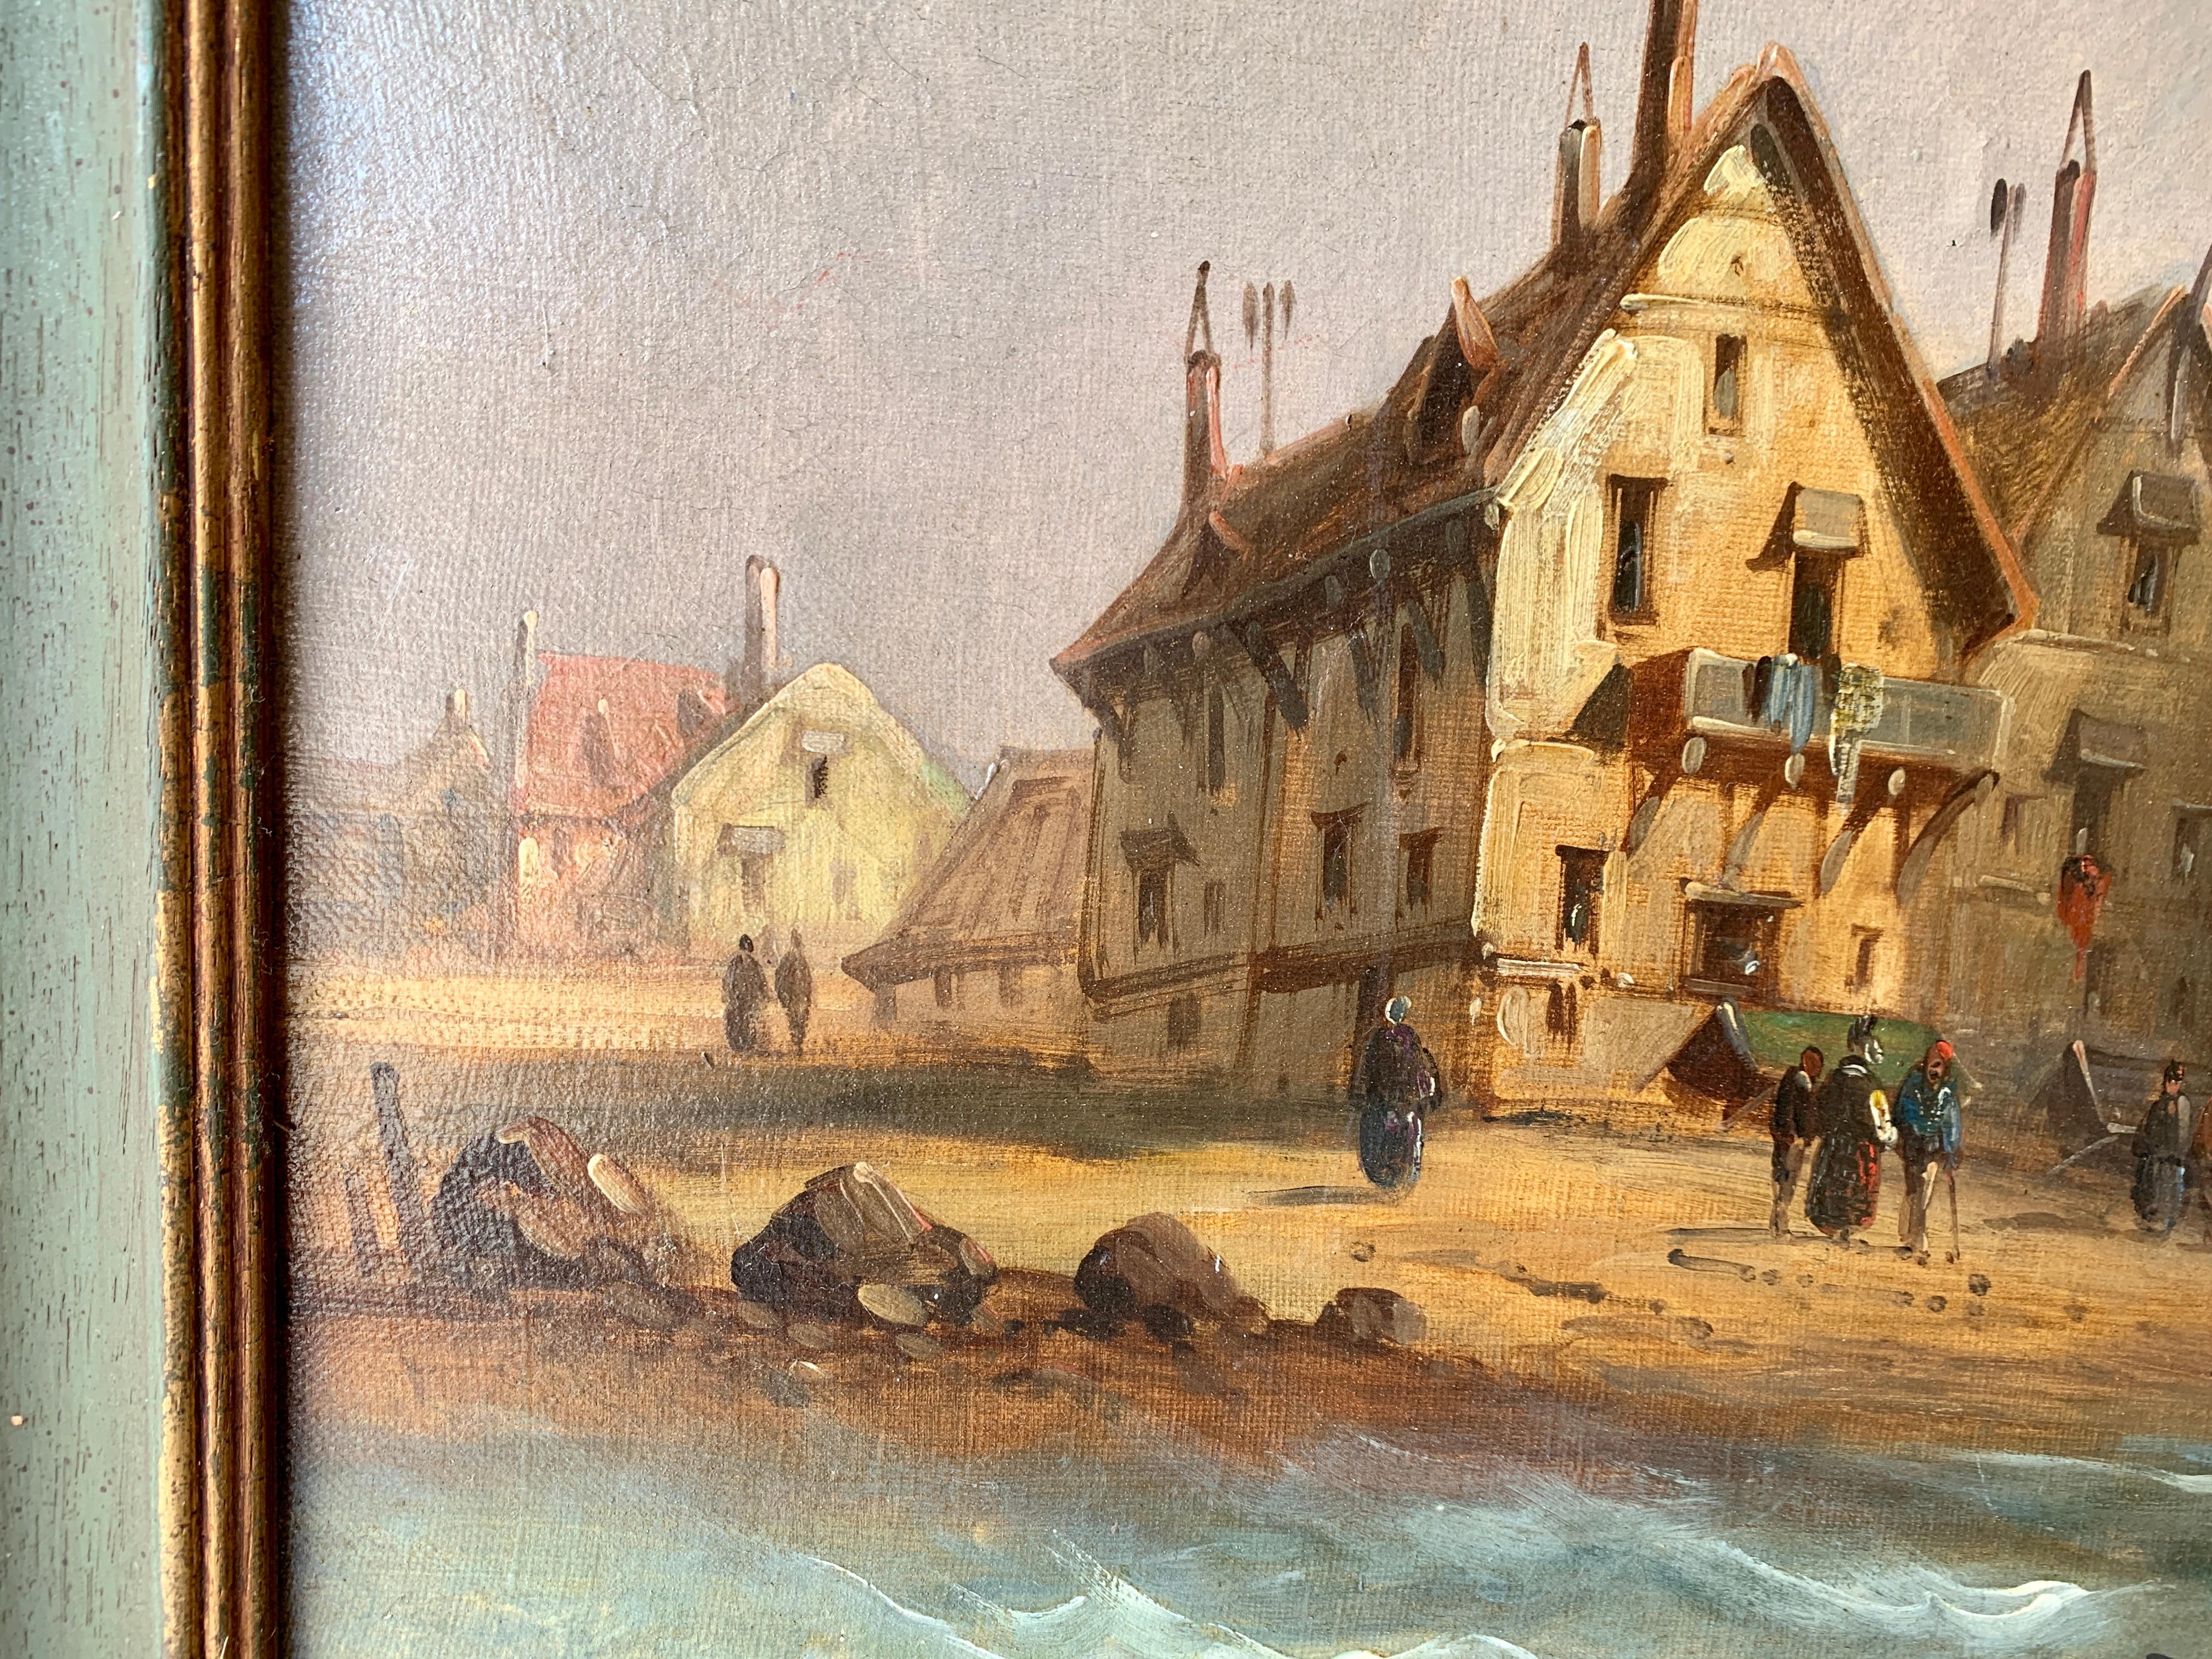 French 19th century fishing boats off the coast with figures, houses and beach - Victorian Painting by J.Willems